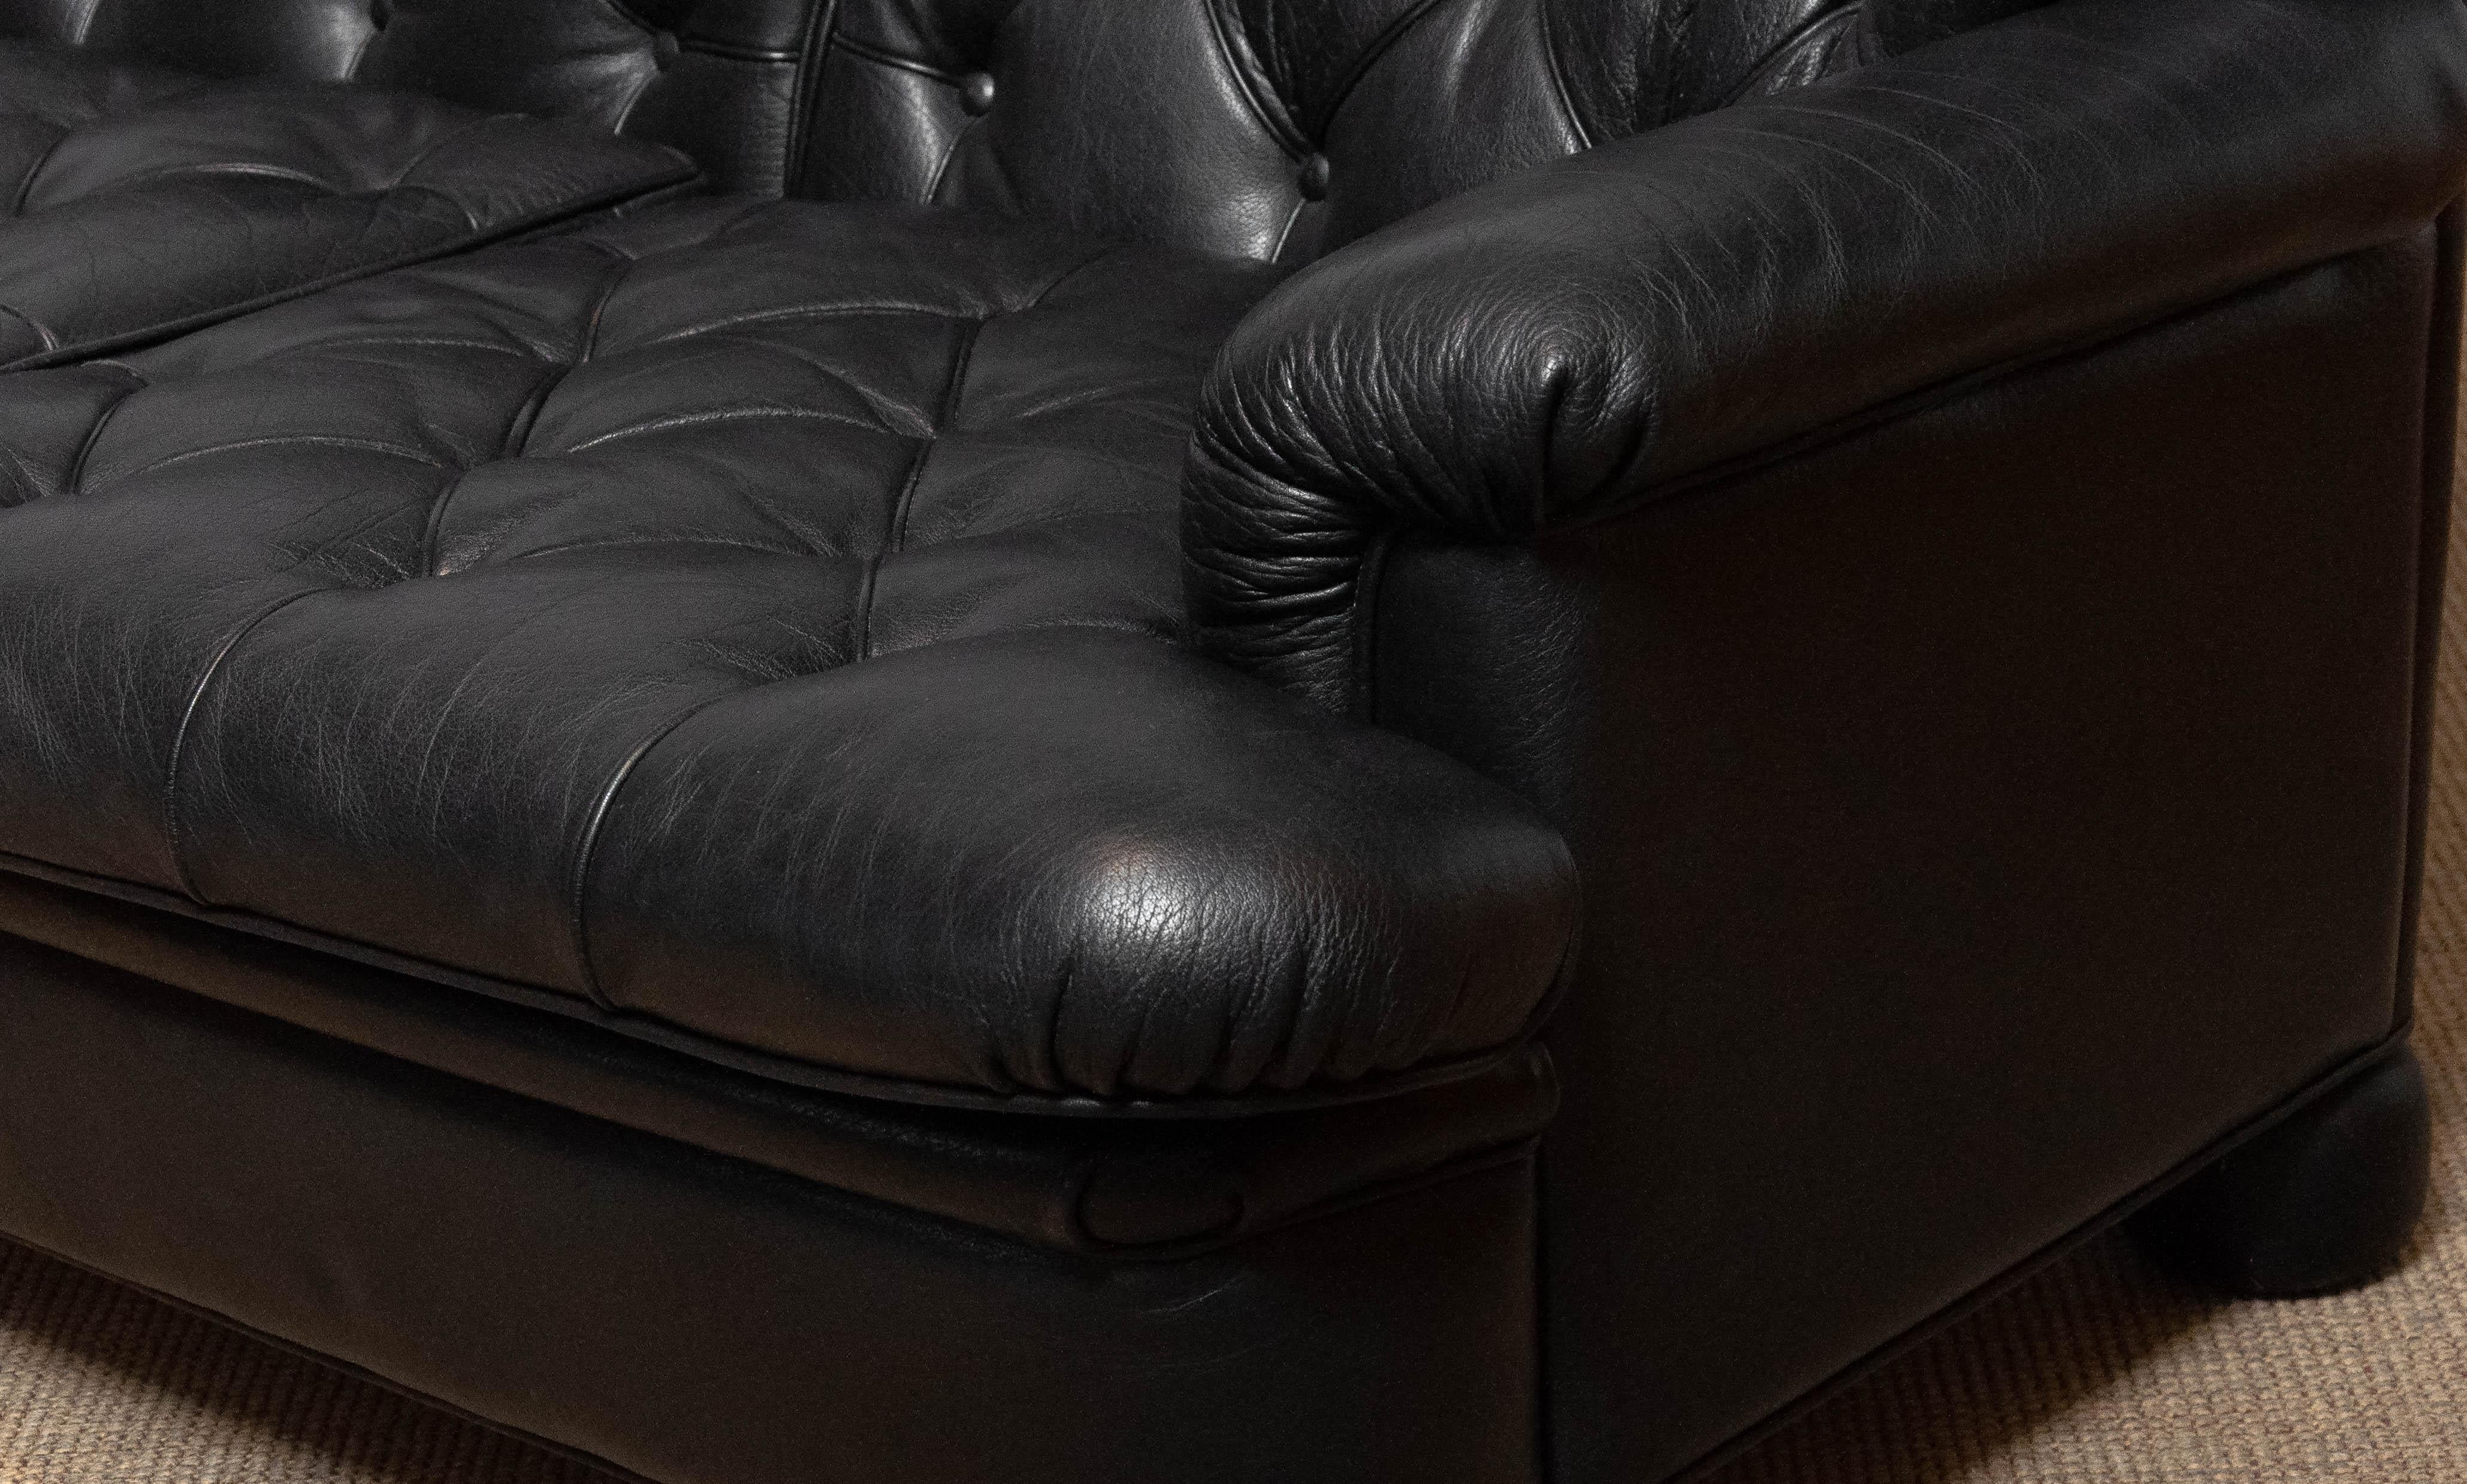 Swedish 1960 Black Leather Chesterfield Model 'Jupiter' Three Seater Sofa by Arne Norell For Sale